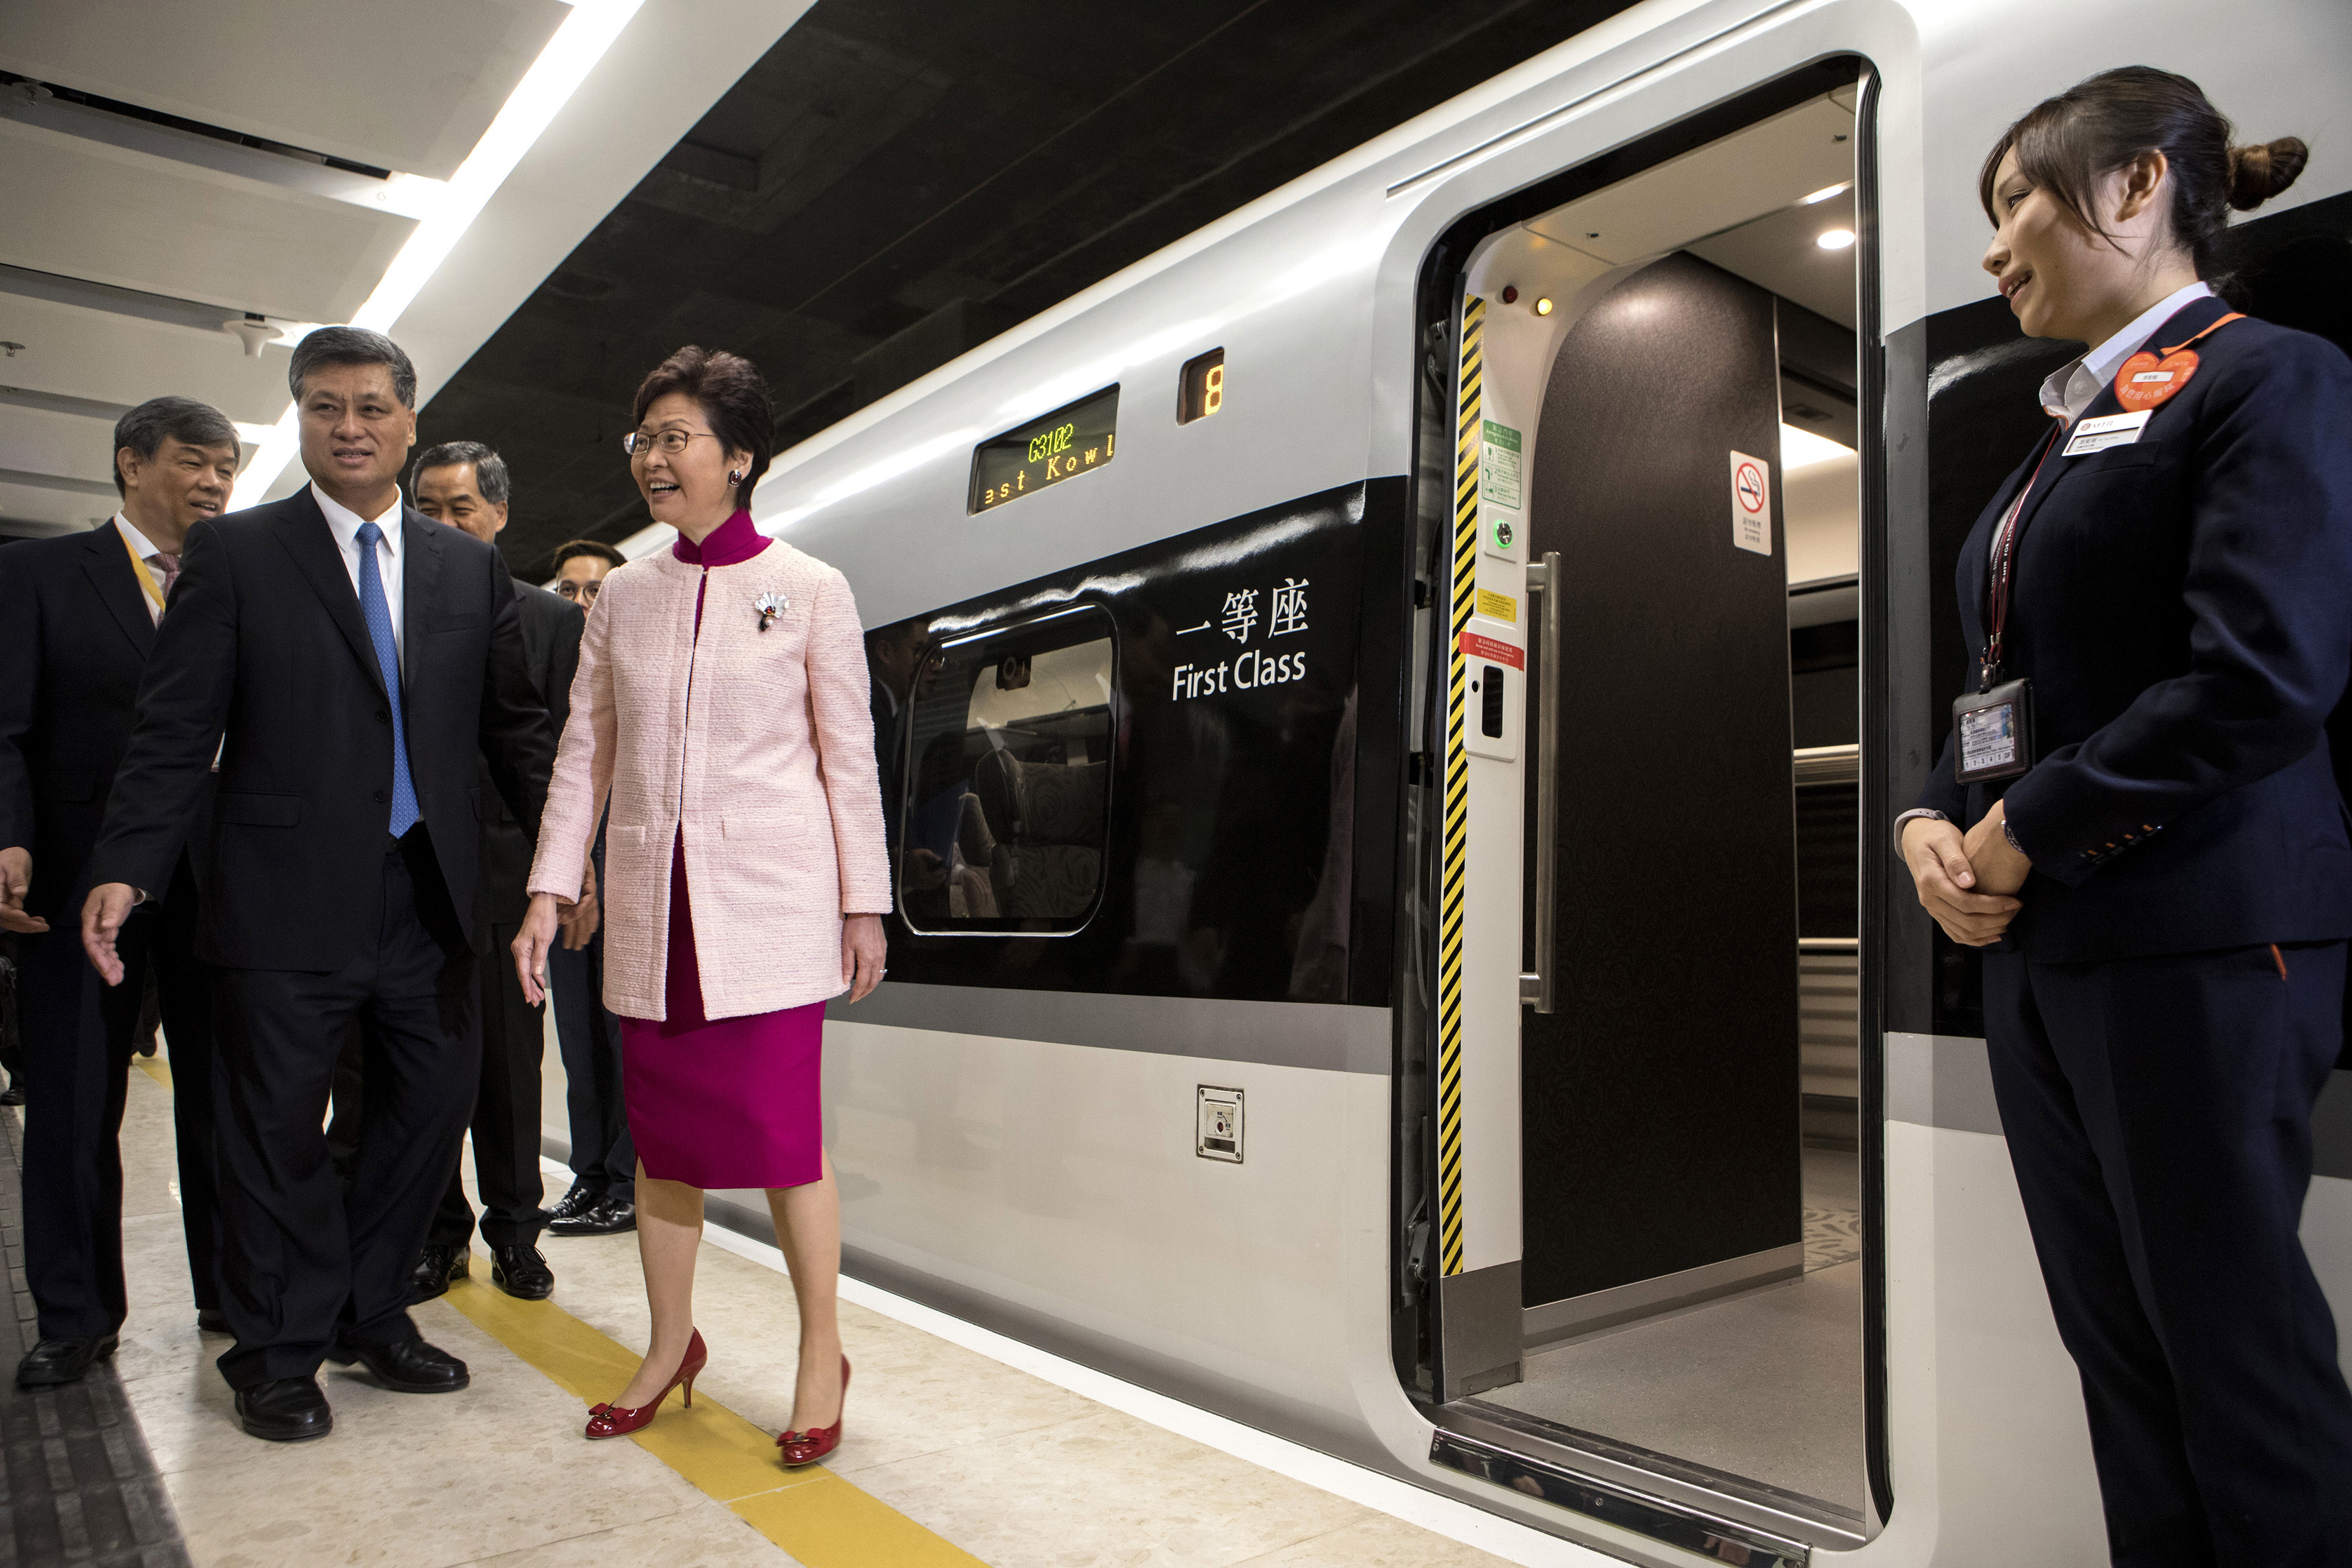 Ma Xingrui, governor of Guangdong Province, front row left, and Carrie Lam, Hong Kong's chief executive, front row second left, stand next to a Guangzhou-Shenzhen-Hong Kong Express Rail Link (XRL) Vibrant Express train bound for Guangzhou Nan Station waits in the Mainland Port Area at West Kowloon Station, which houses the terminal for the XRL in Hong Kong, Saturday, Sept. 22, 2018. (Giulia Marchi/Pool Photo via AP)